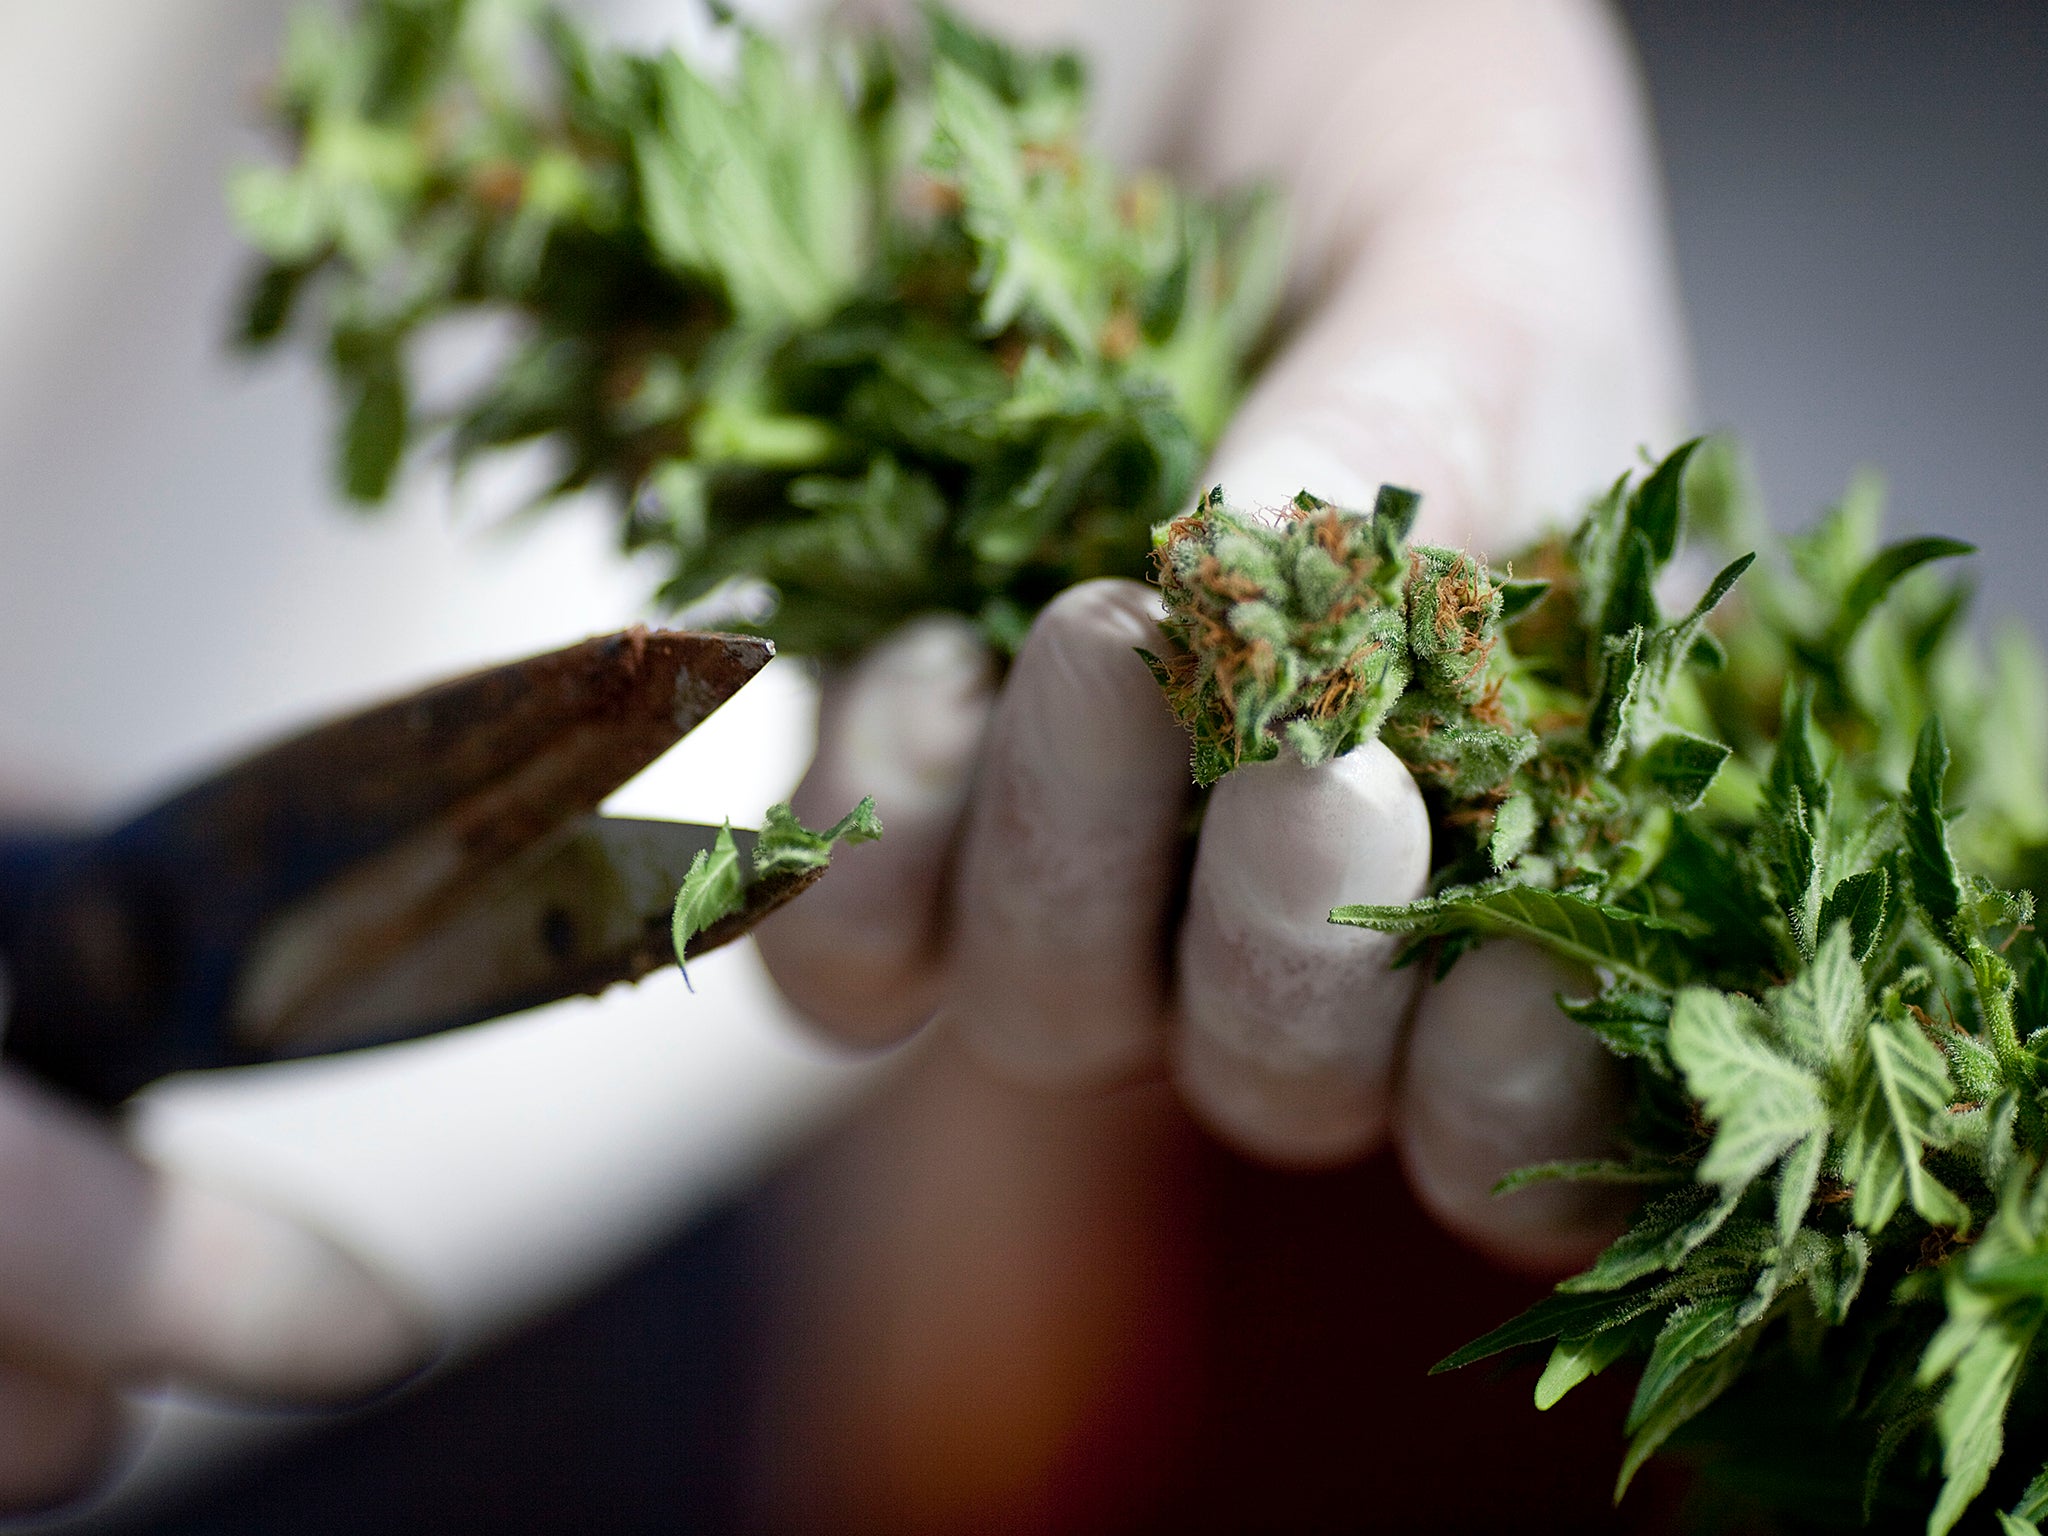 The court said the ruling had no bearing on the legalisation of marijuana for recreational use